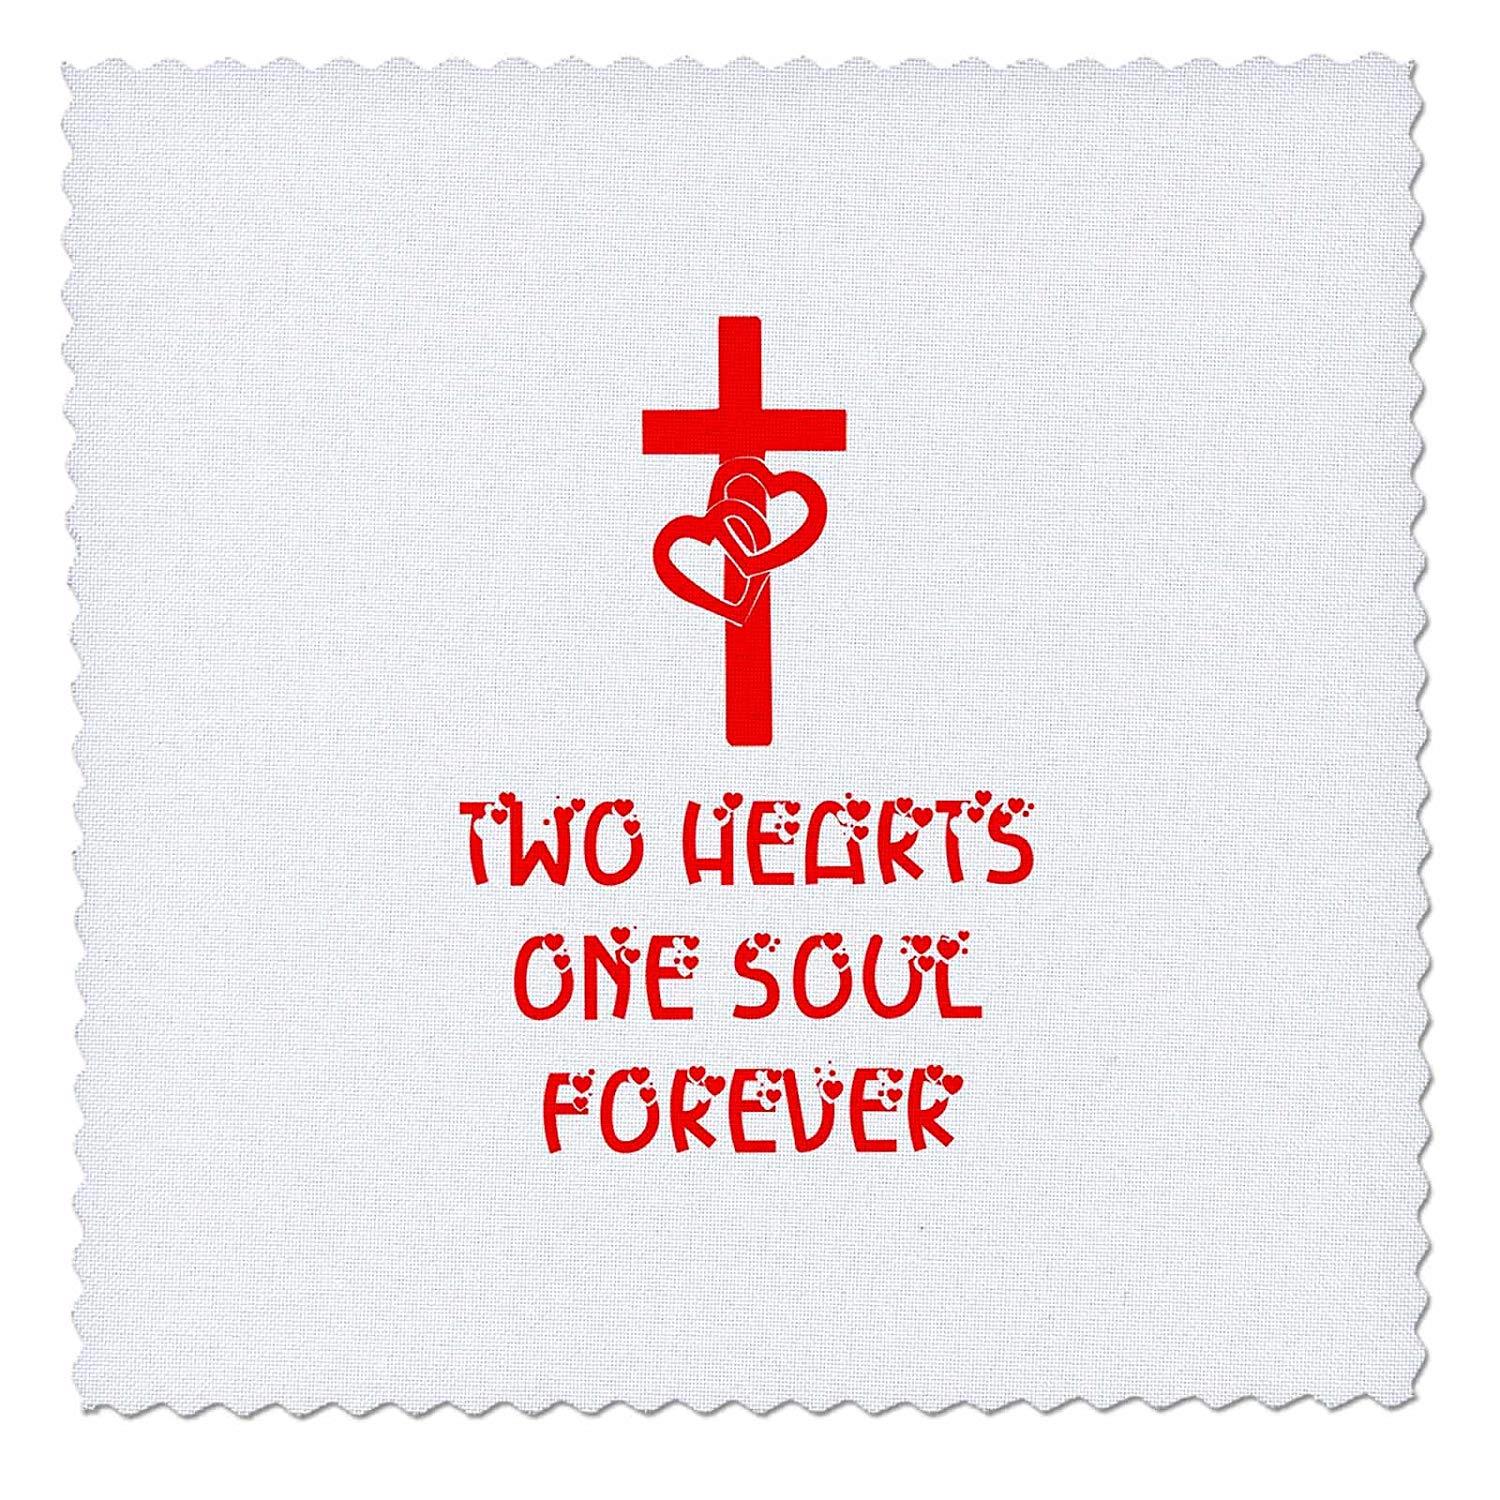 Square White with Red Cross Logo - Cheap Logo Red Square White Cross, find Logo Red Square White Cross ...